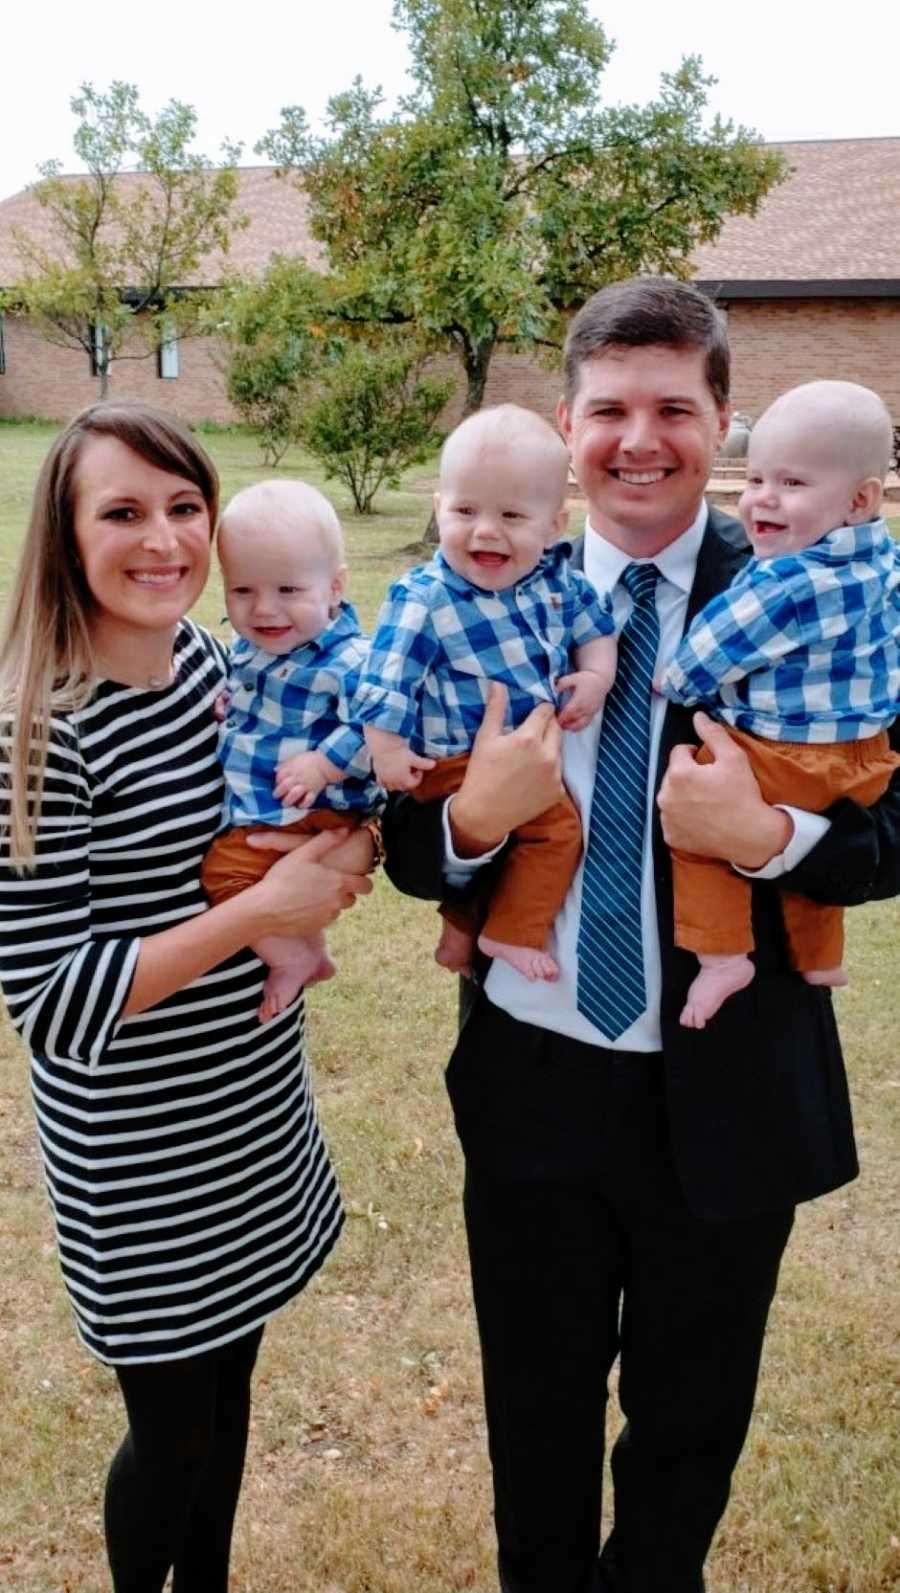 Couple with three identical male triplets pose for a photo at Sunday Church